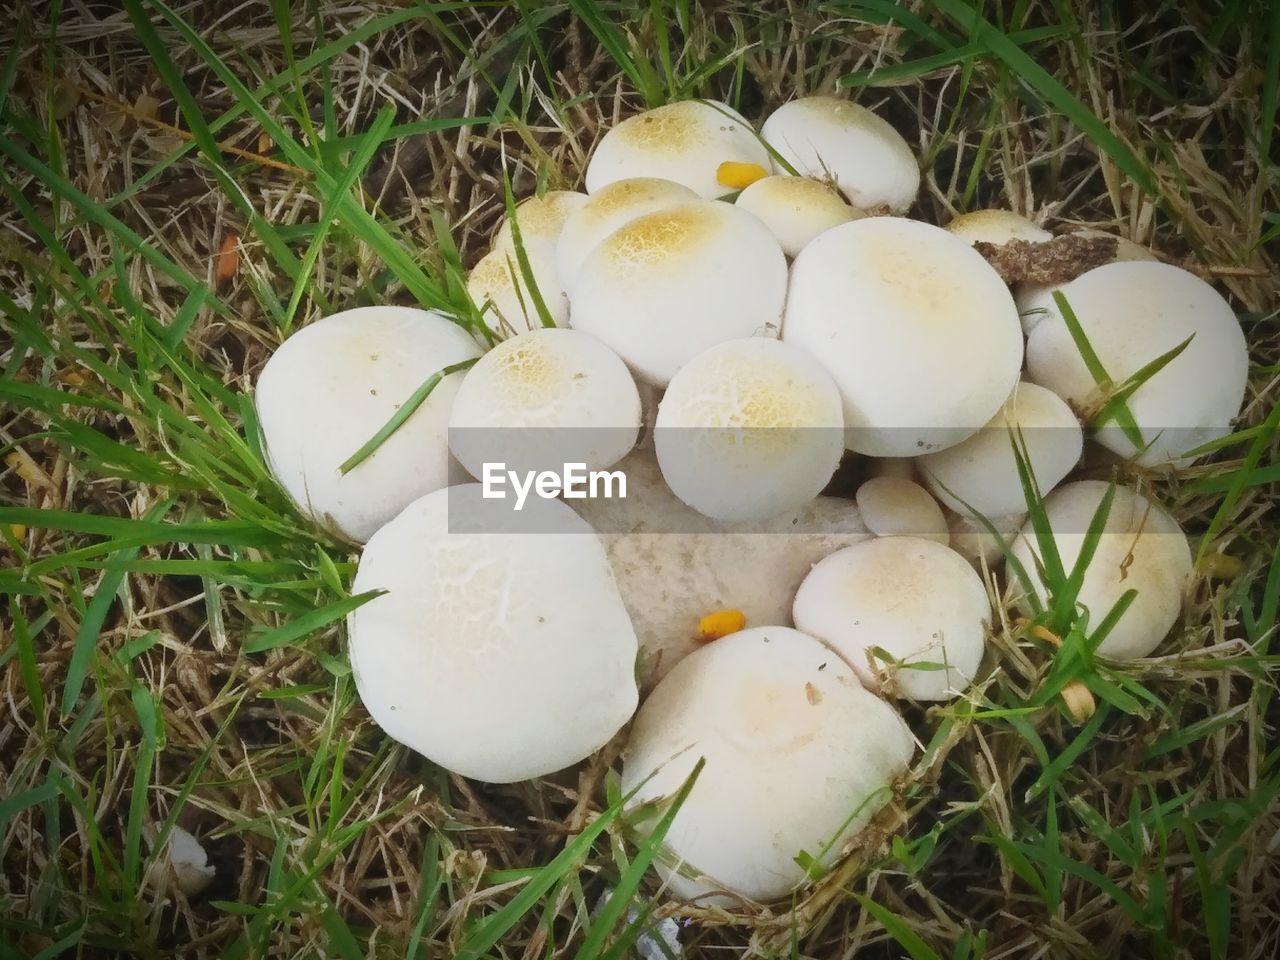 HIGH ANGLE VIEW OF EGGS ON FIELD IN FARM